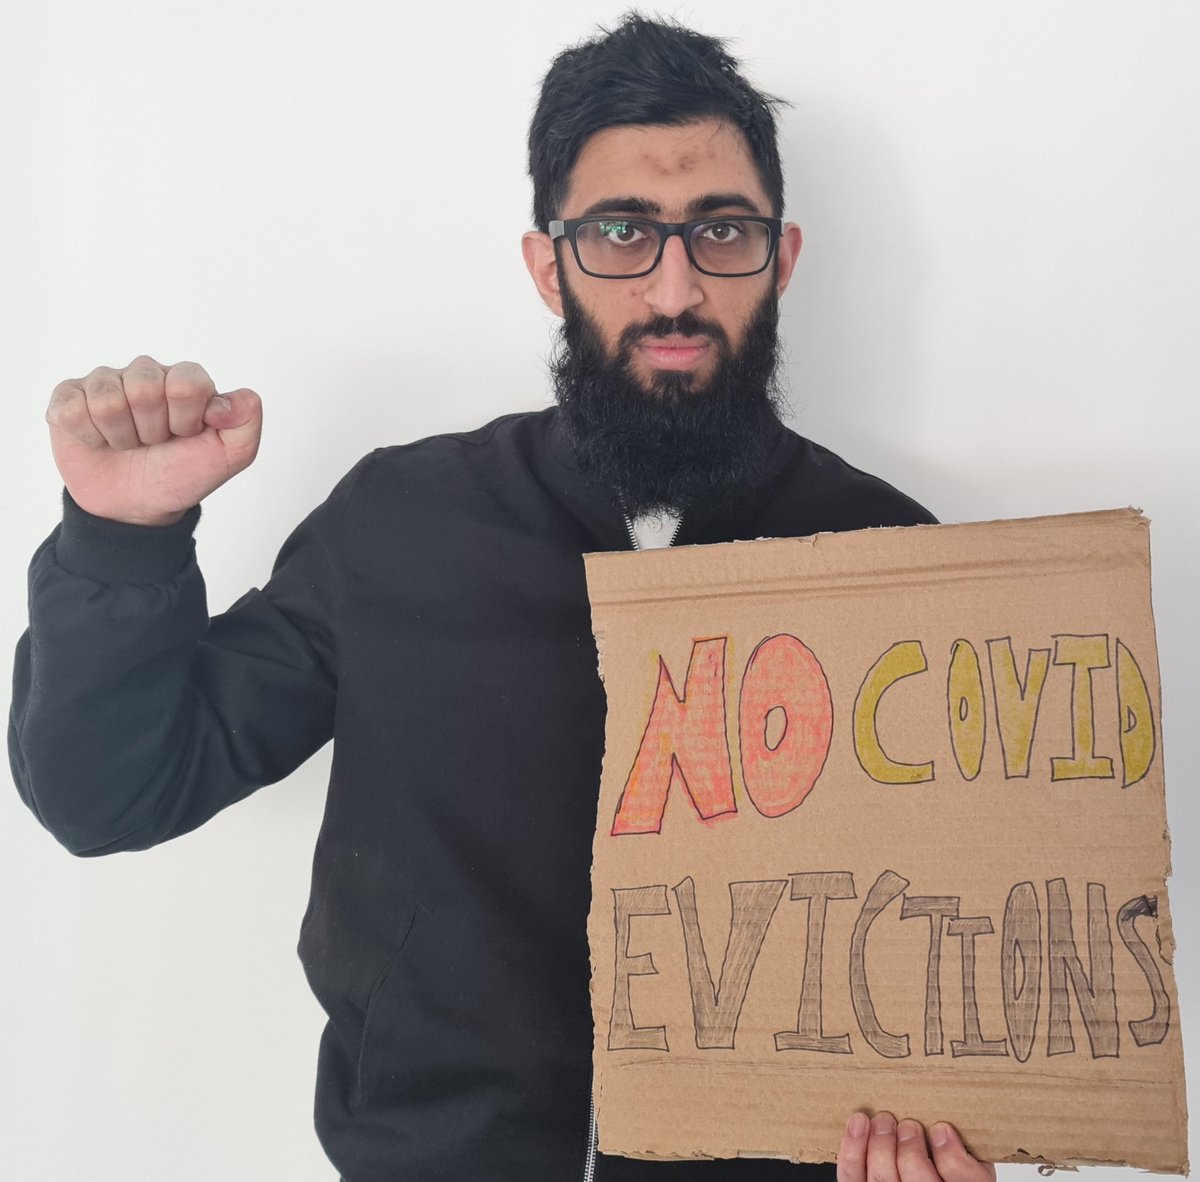 220,000 private renters having fallen into arrears, and an estimated 60,000 eviction notices served through no fault of the tenants. The government has failed them. We stand in solidarity with them!

@BradMomentum @PeoplesMomentum
#NoEvictions #NoCovidEvictions